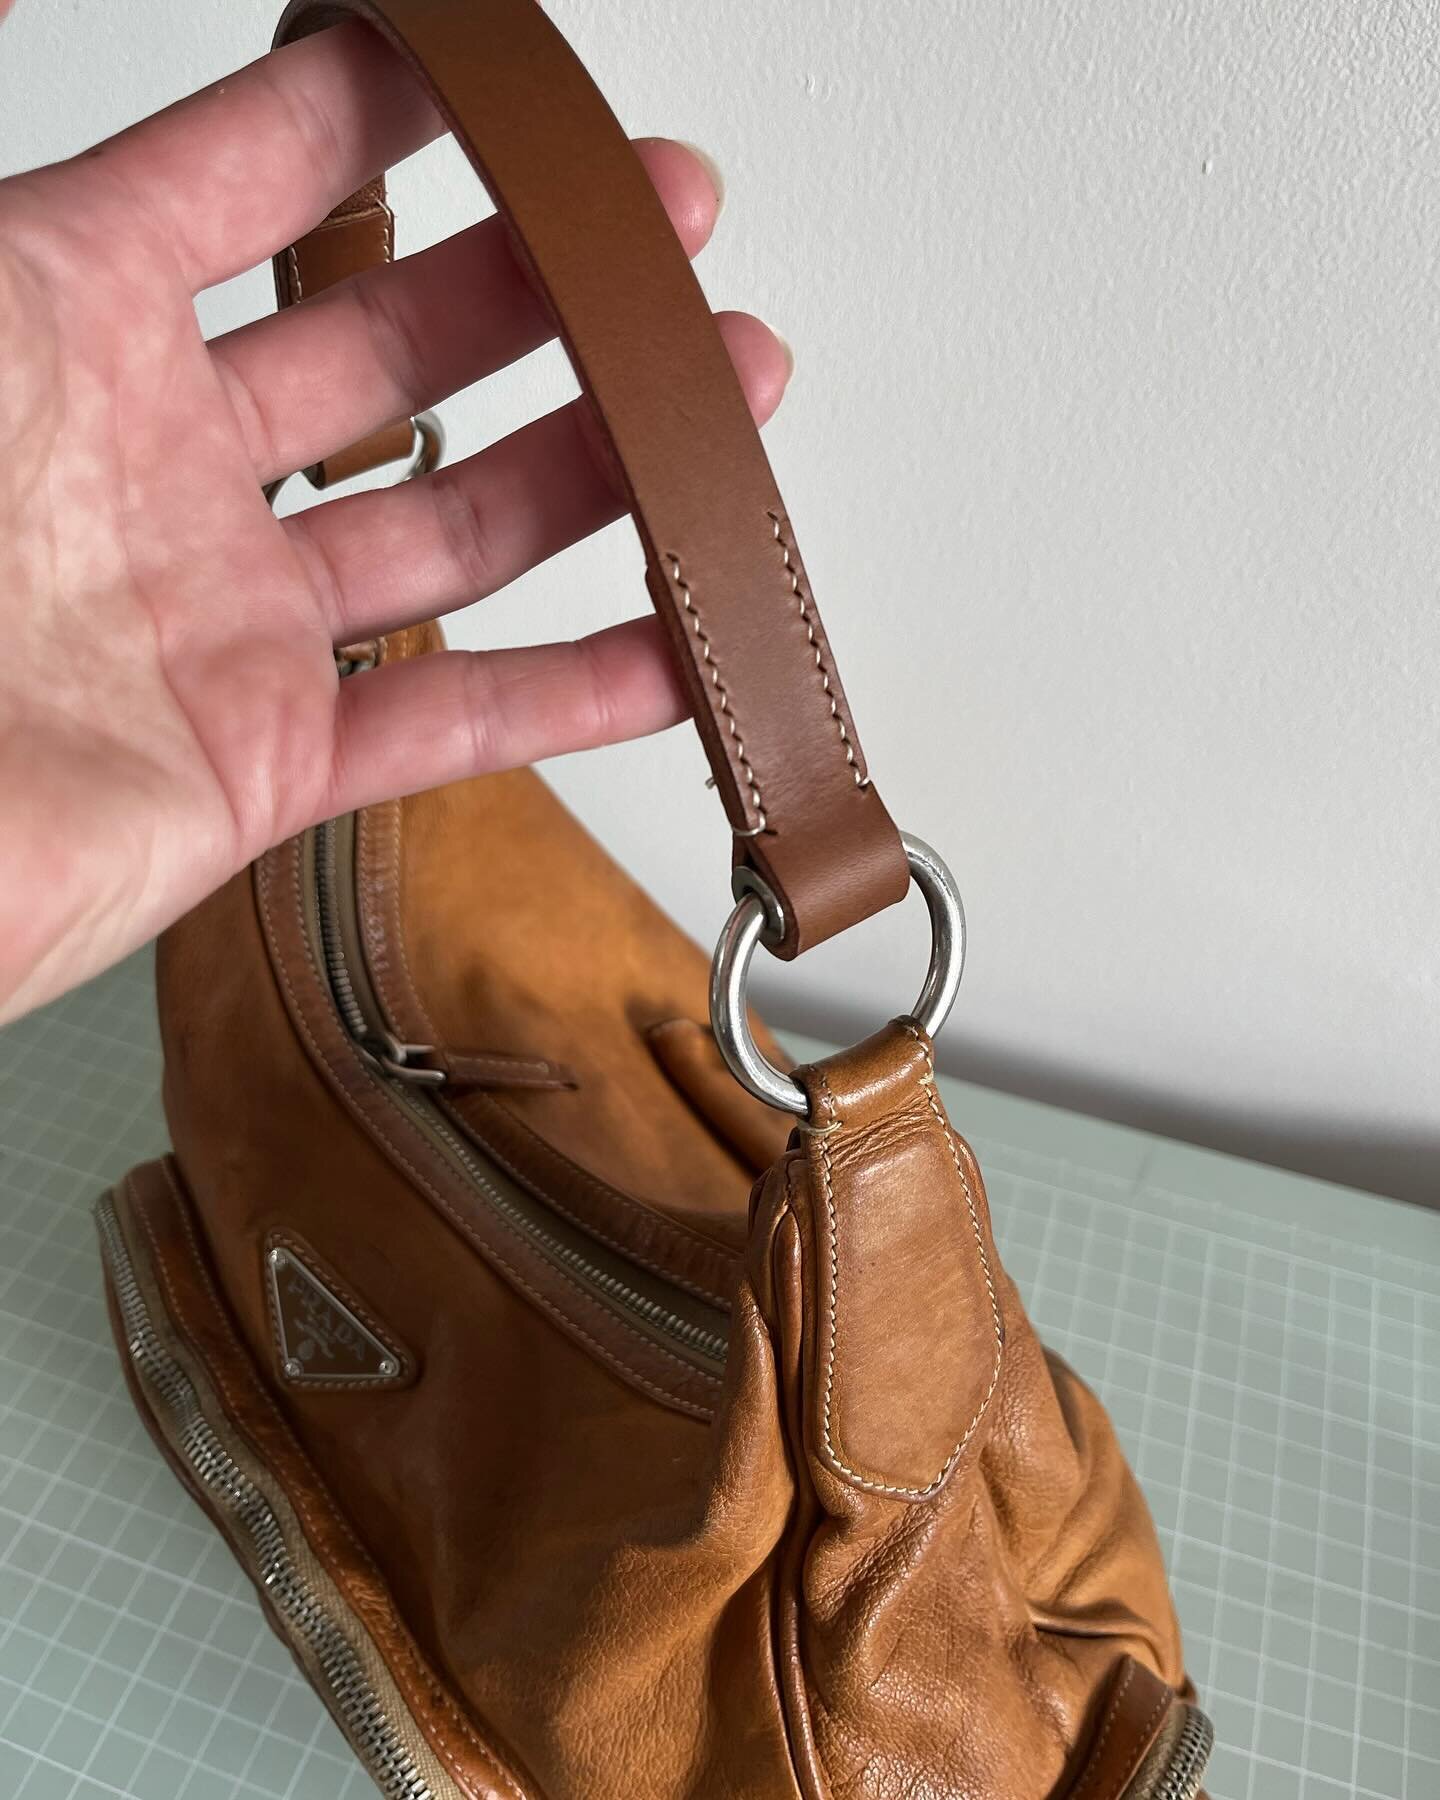 This @prada bag came to me as the original strap had snapped and disintegrated.  The bag had been well worn over the years.

I created a new handle from a brown vegetable tanned leather that I had.  This is the leather which is around 3 - 4mm thick. 